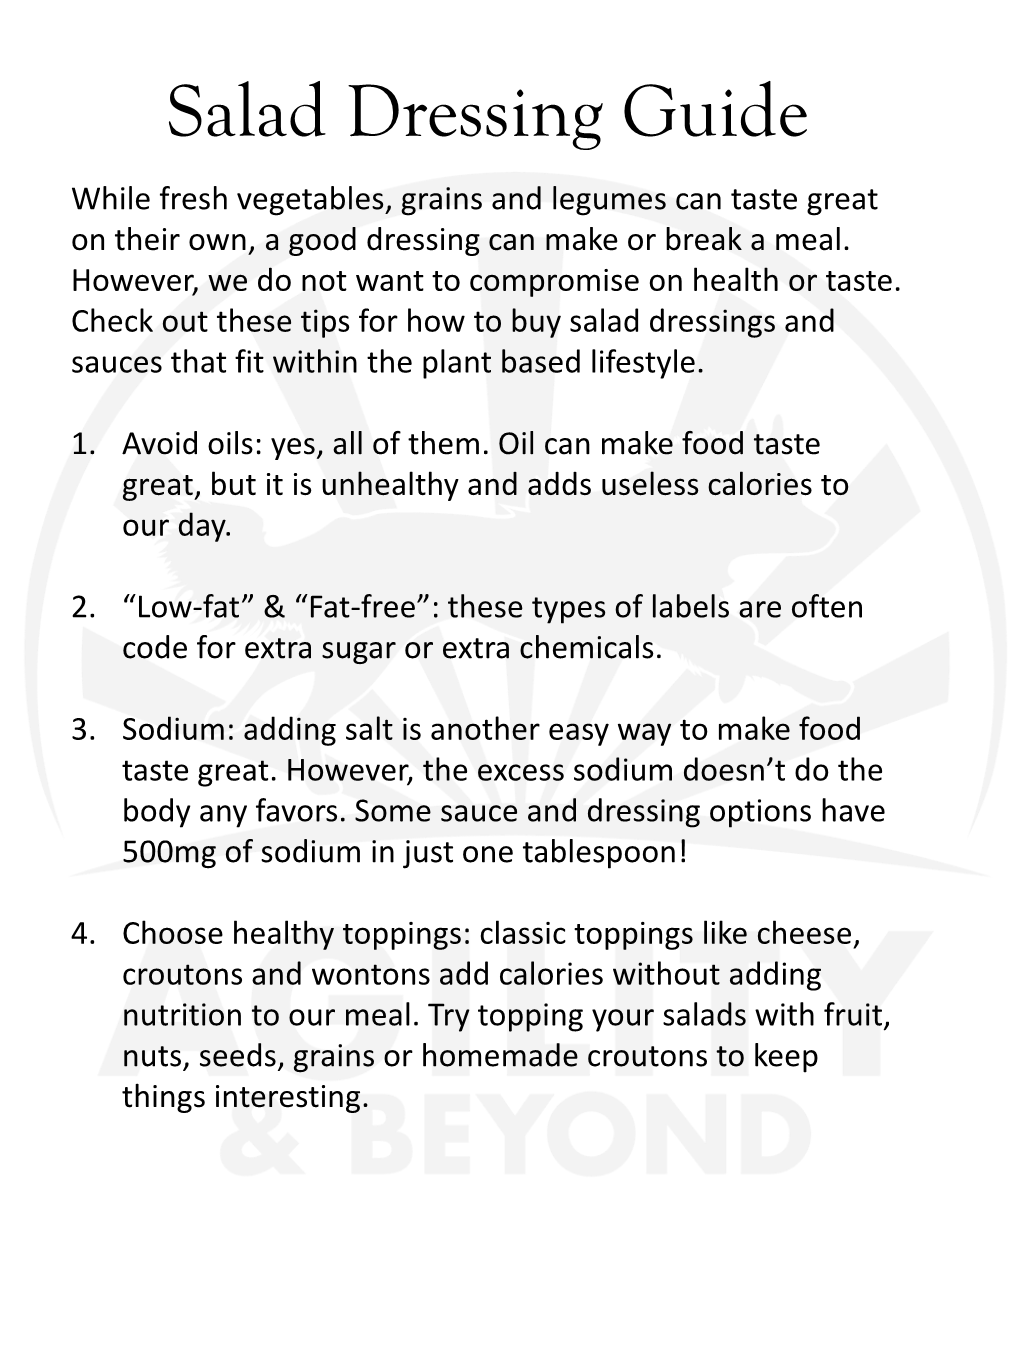 Salad Dressing Guide While Fresh Vegetables, Grains and Legumes Can Taste Great on Their Own, a Good Dressing Can Make Or Break a Meal